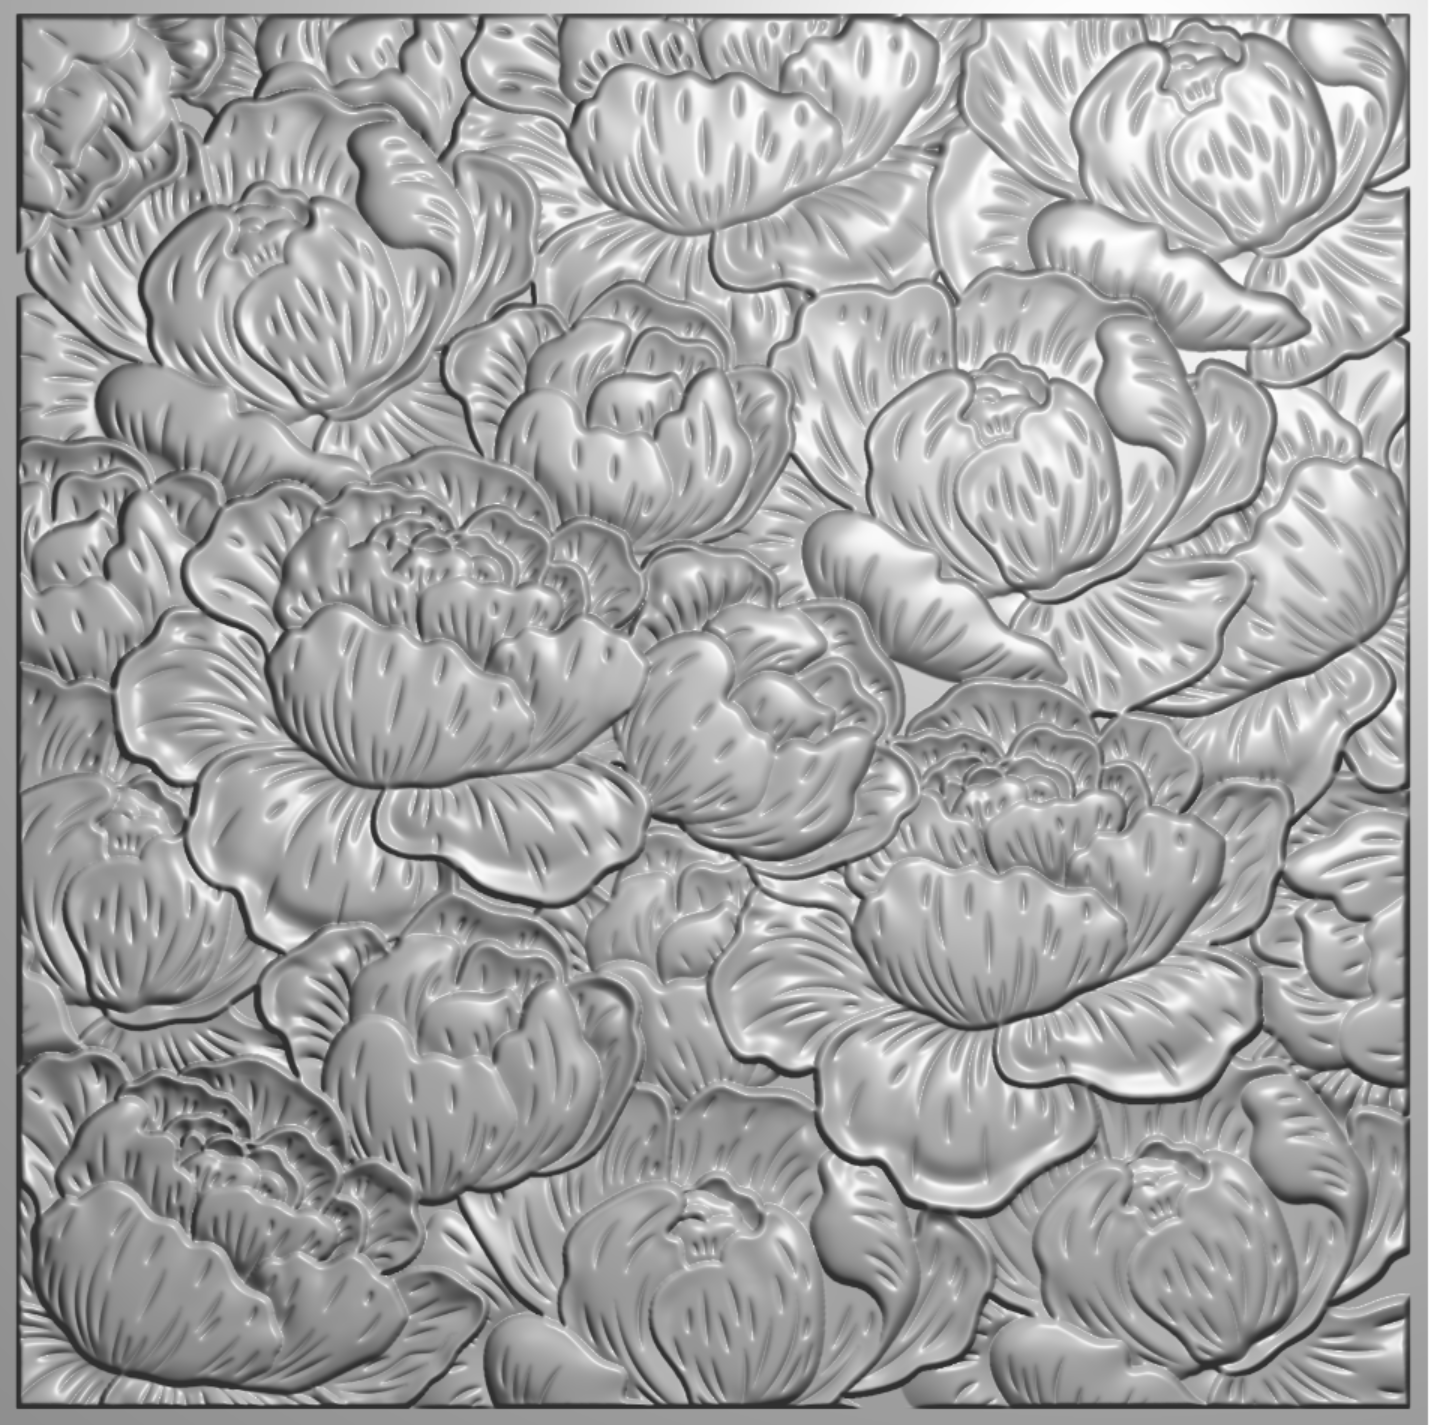 Creative Expressions Peony Blooms 6 in x 6 in 3D Embossing Folder